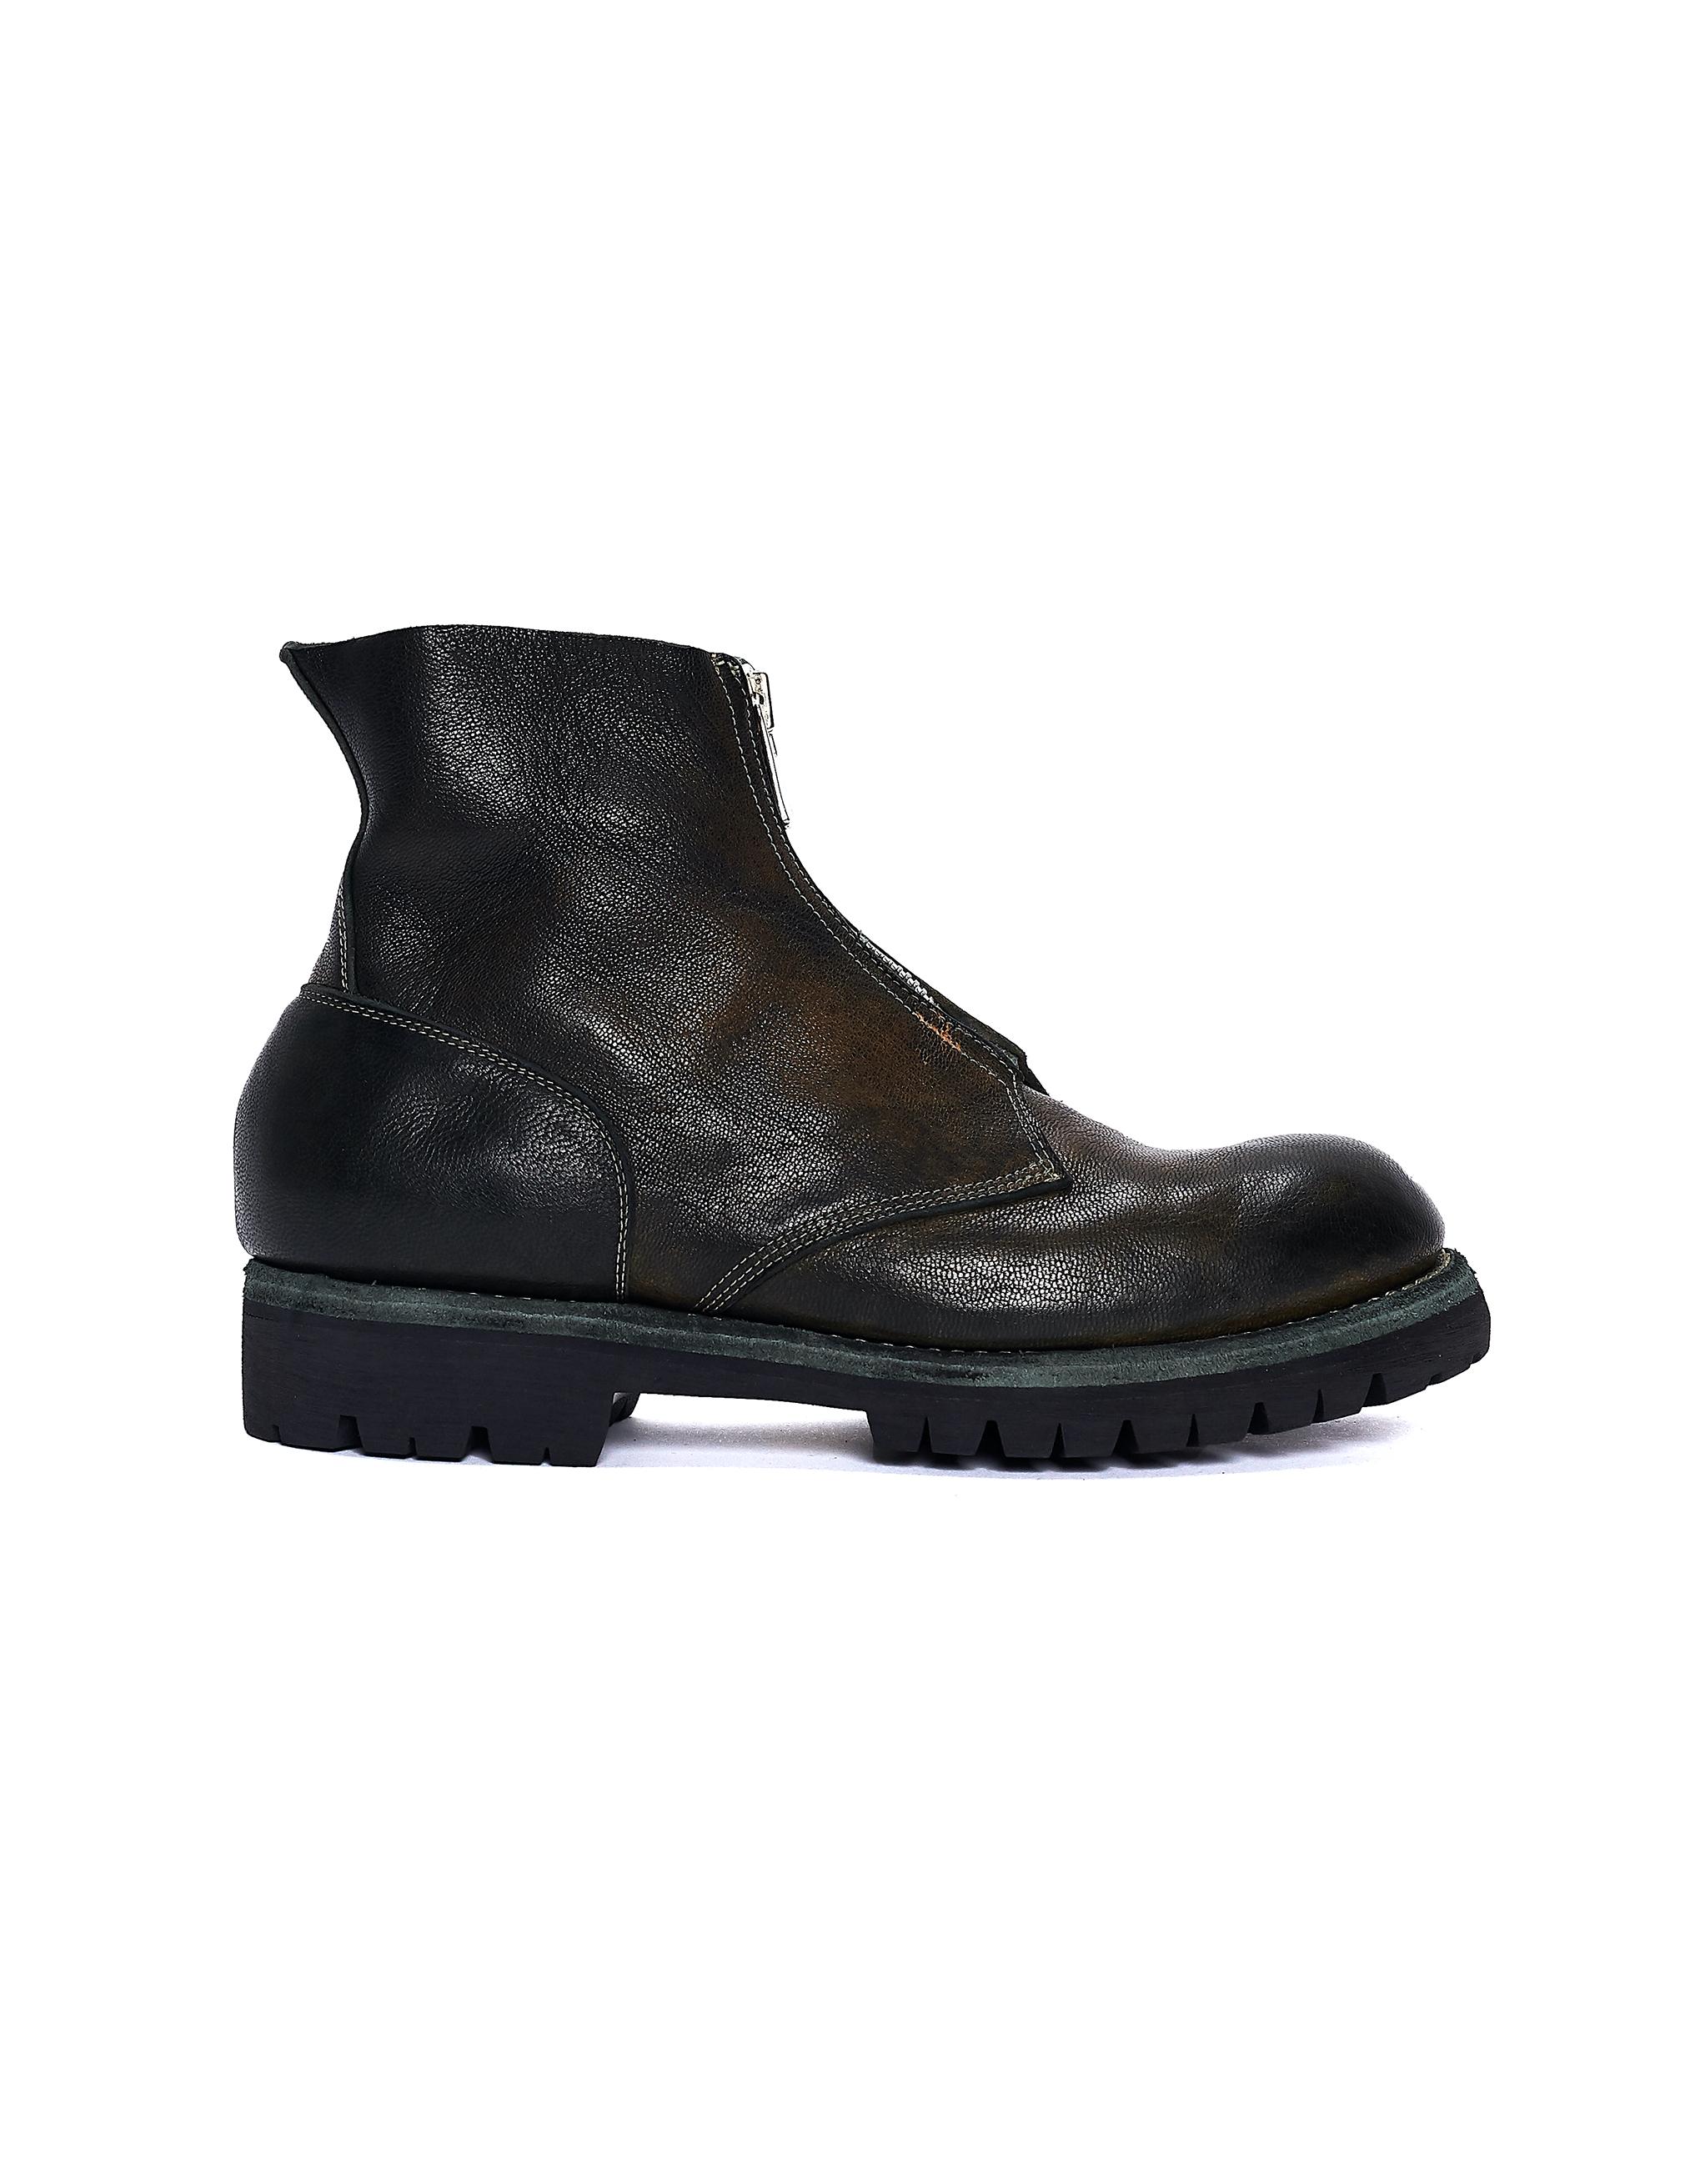 Guidi Green Leather Vibram Sole Zip Boots for Men - Lyst